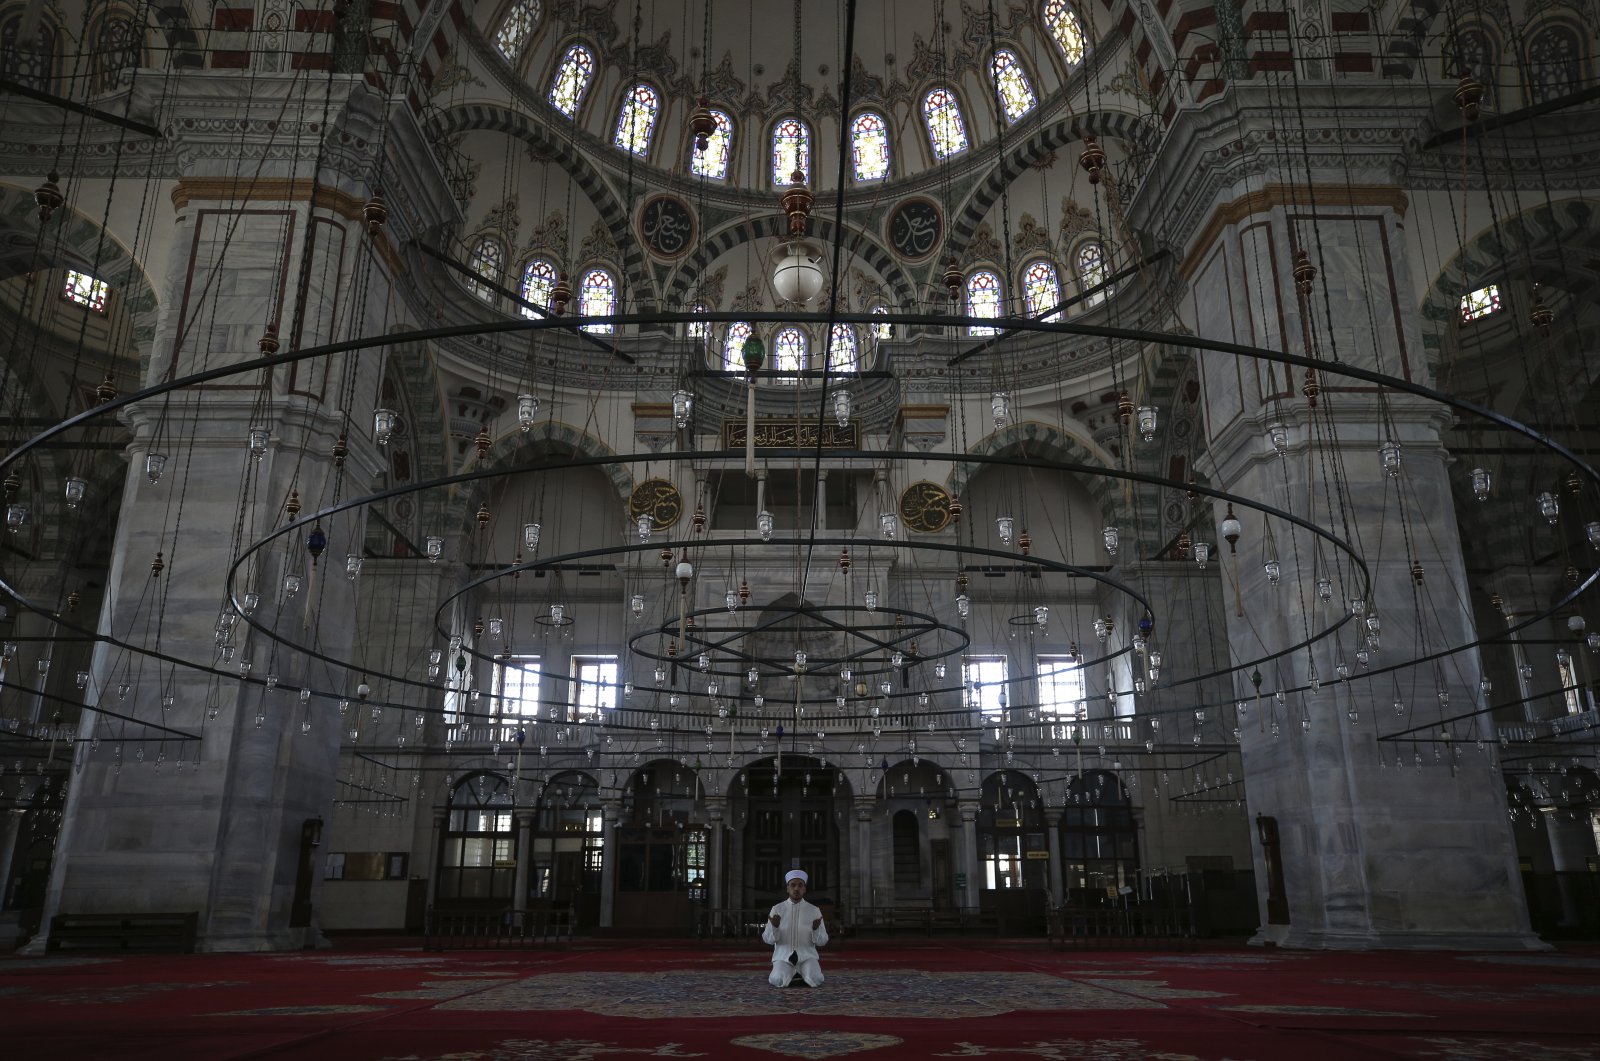 A Quiet Ramadan Bayram in Turkey in Time of COVID-19 Pandemic